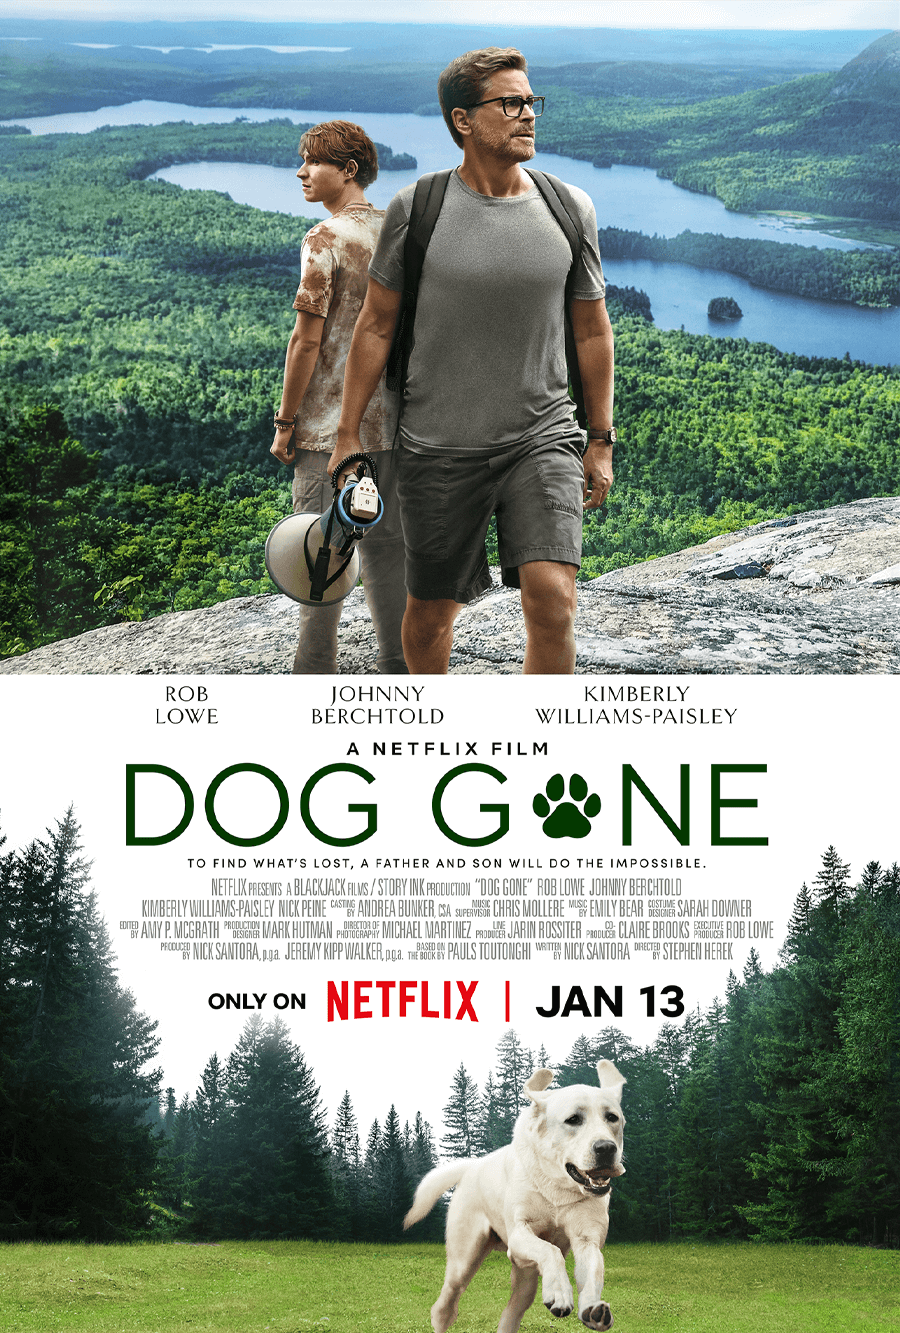 dog-gone-netflix-movie-coming-to-netflix-in-january-2023-poster.png